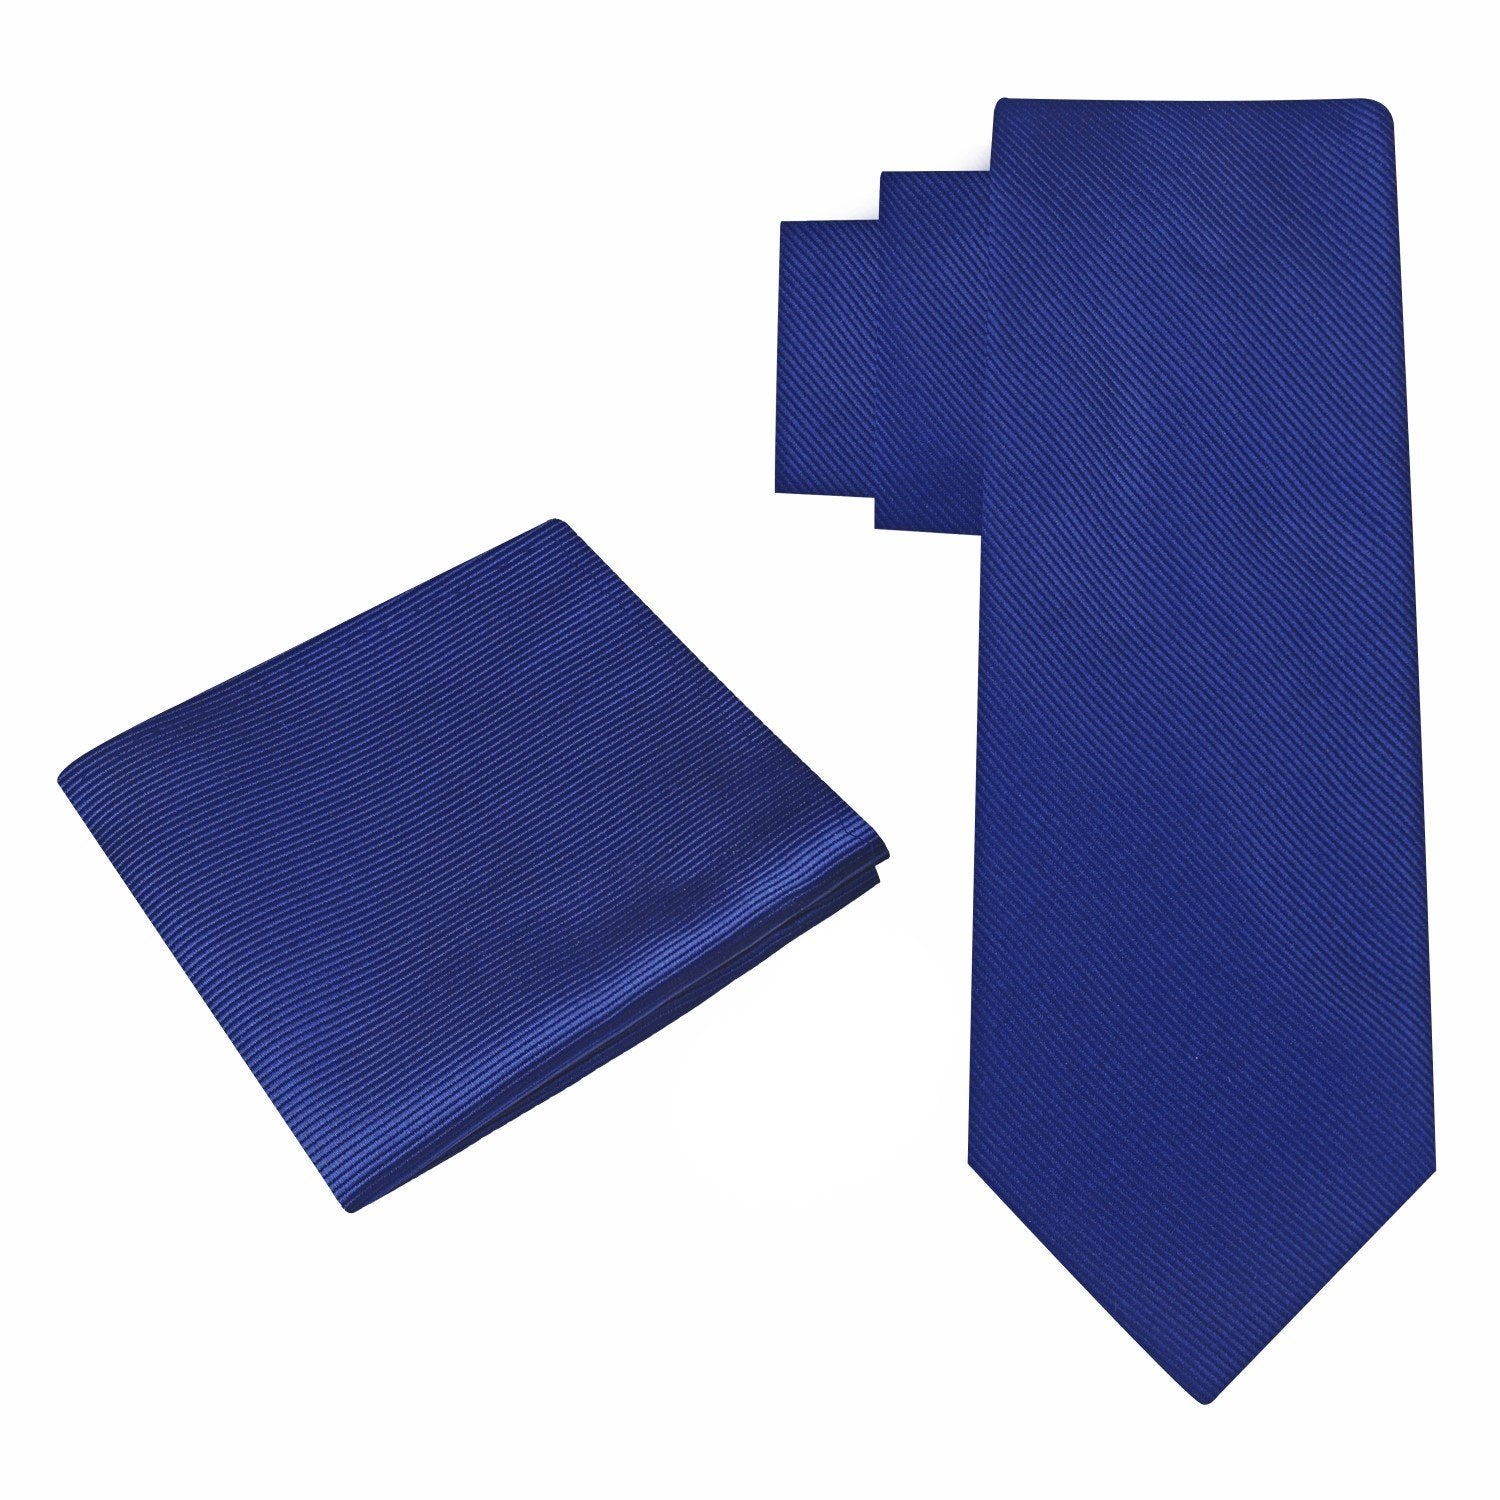 Alt View: A Solid Dark Blue Colored Silk Necktie With Matching Pocket Square||Navy